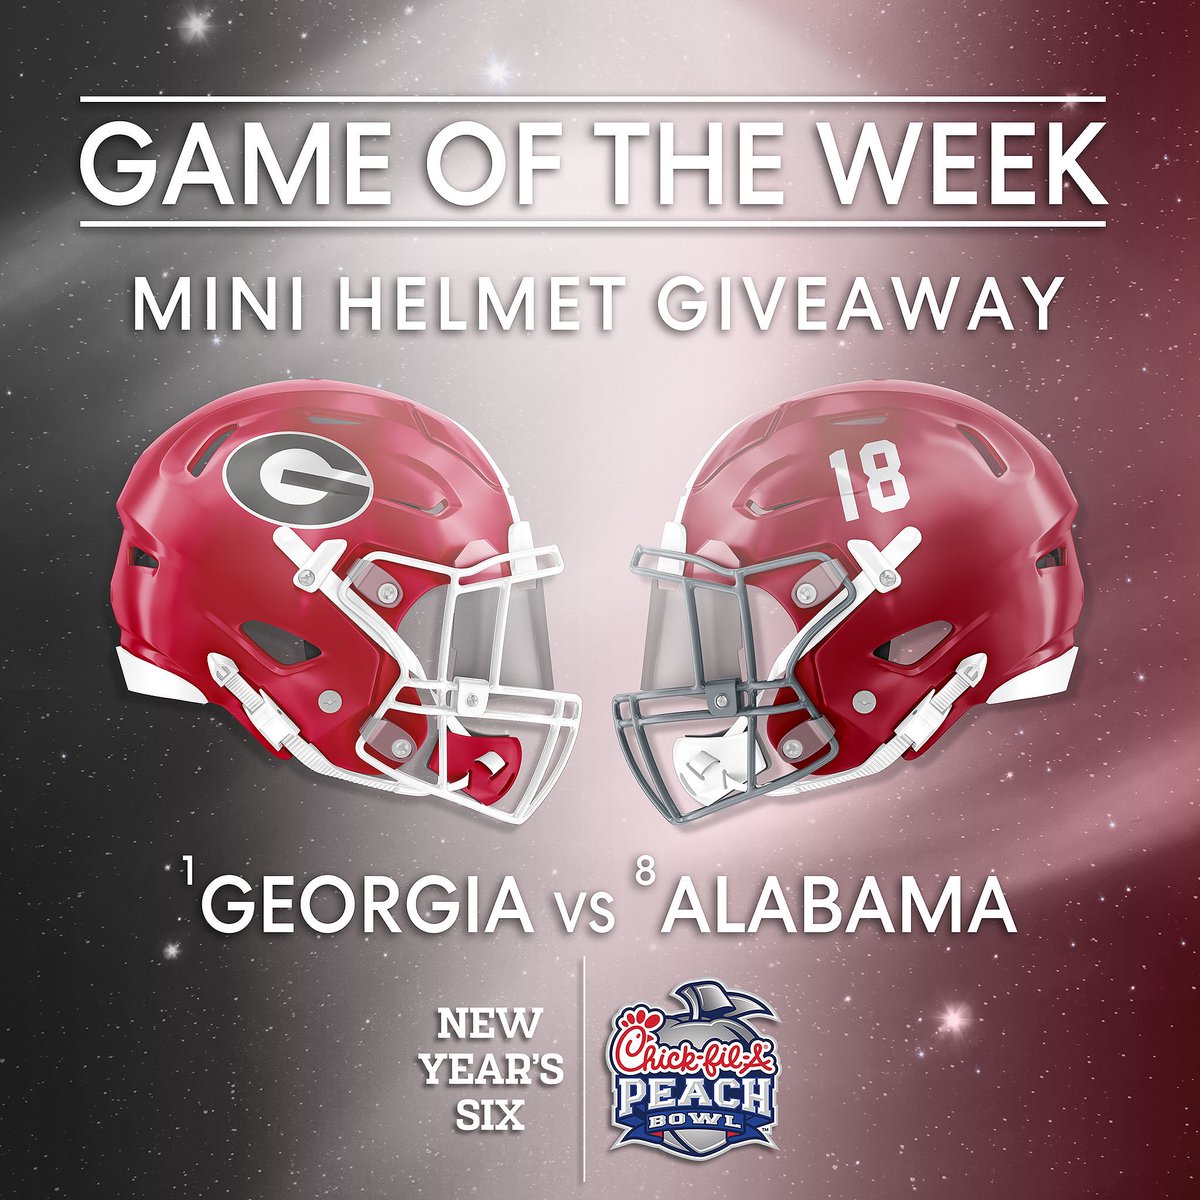 This weekend’s @SEC Championship in ATL will have major @cfbplayoff implications 🔥 For a chance to win a @GeorgiaFootball or @AlabamaFTBL mini helmet: 1️⃣ Follow @CFAPeachBowl 2️⃣ Repost 3️⃣ Comment who you’re cheering for